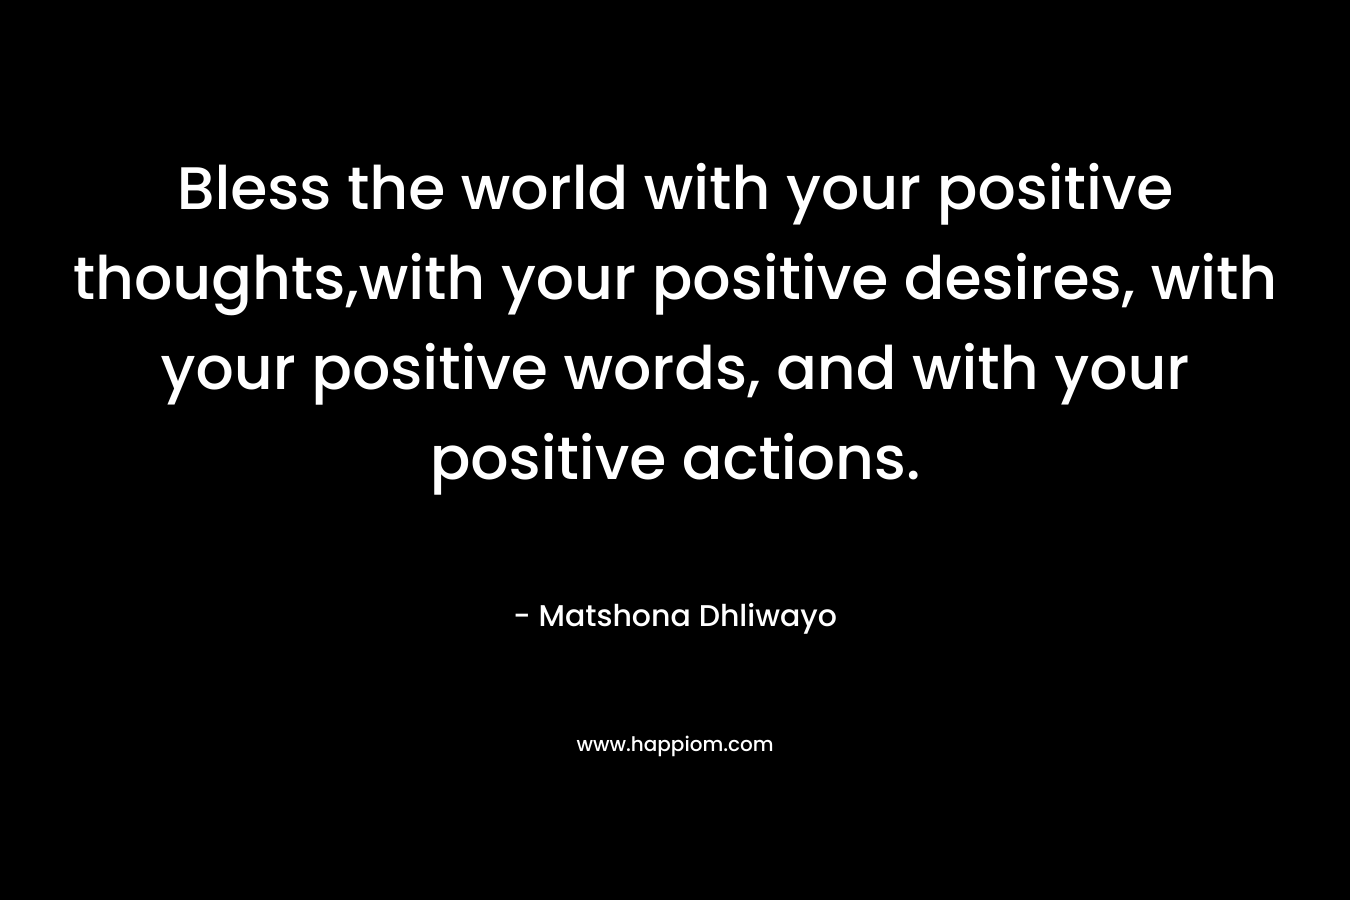 Bless the world with your positive thoughts,with your positive desires, with your positive words, and with your positive actions.